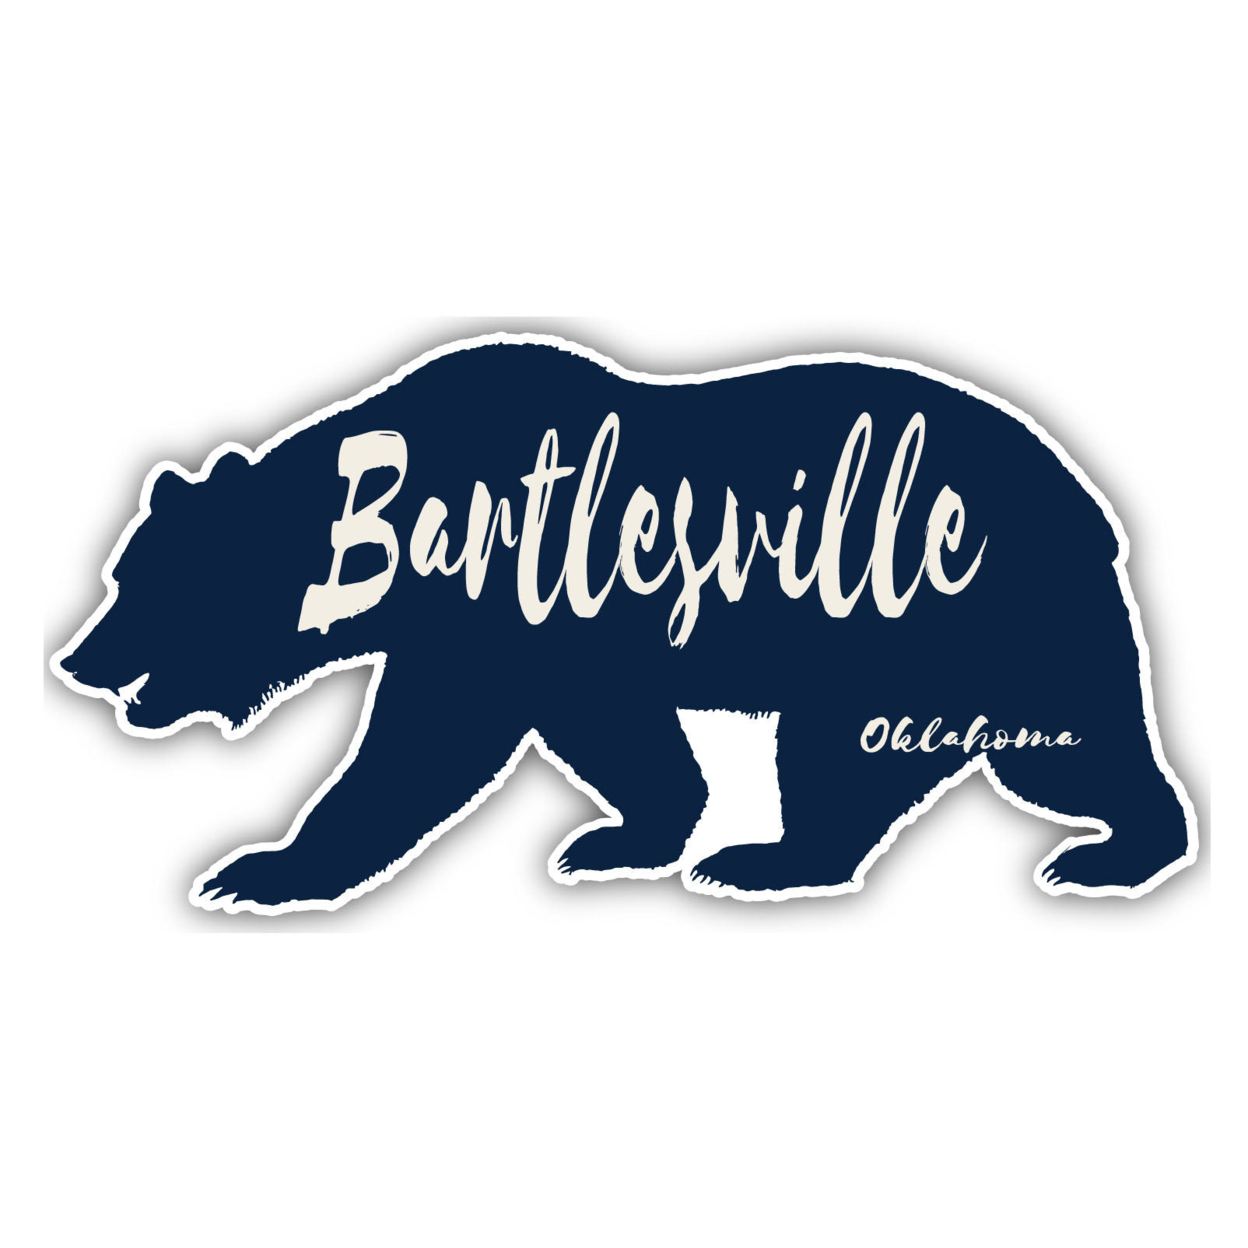 Bartlesville Oklahoma Souvenir Decorative Stickers (Choose Theme And Size) - 4-Pack, 4-Inch, Bear